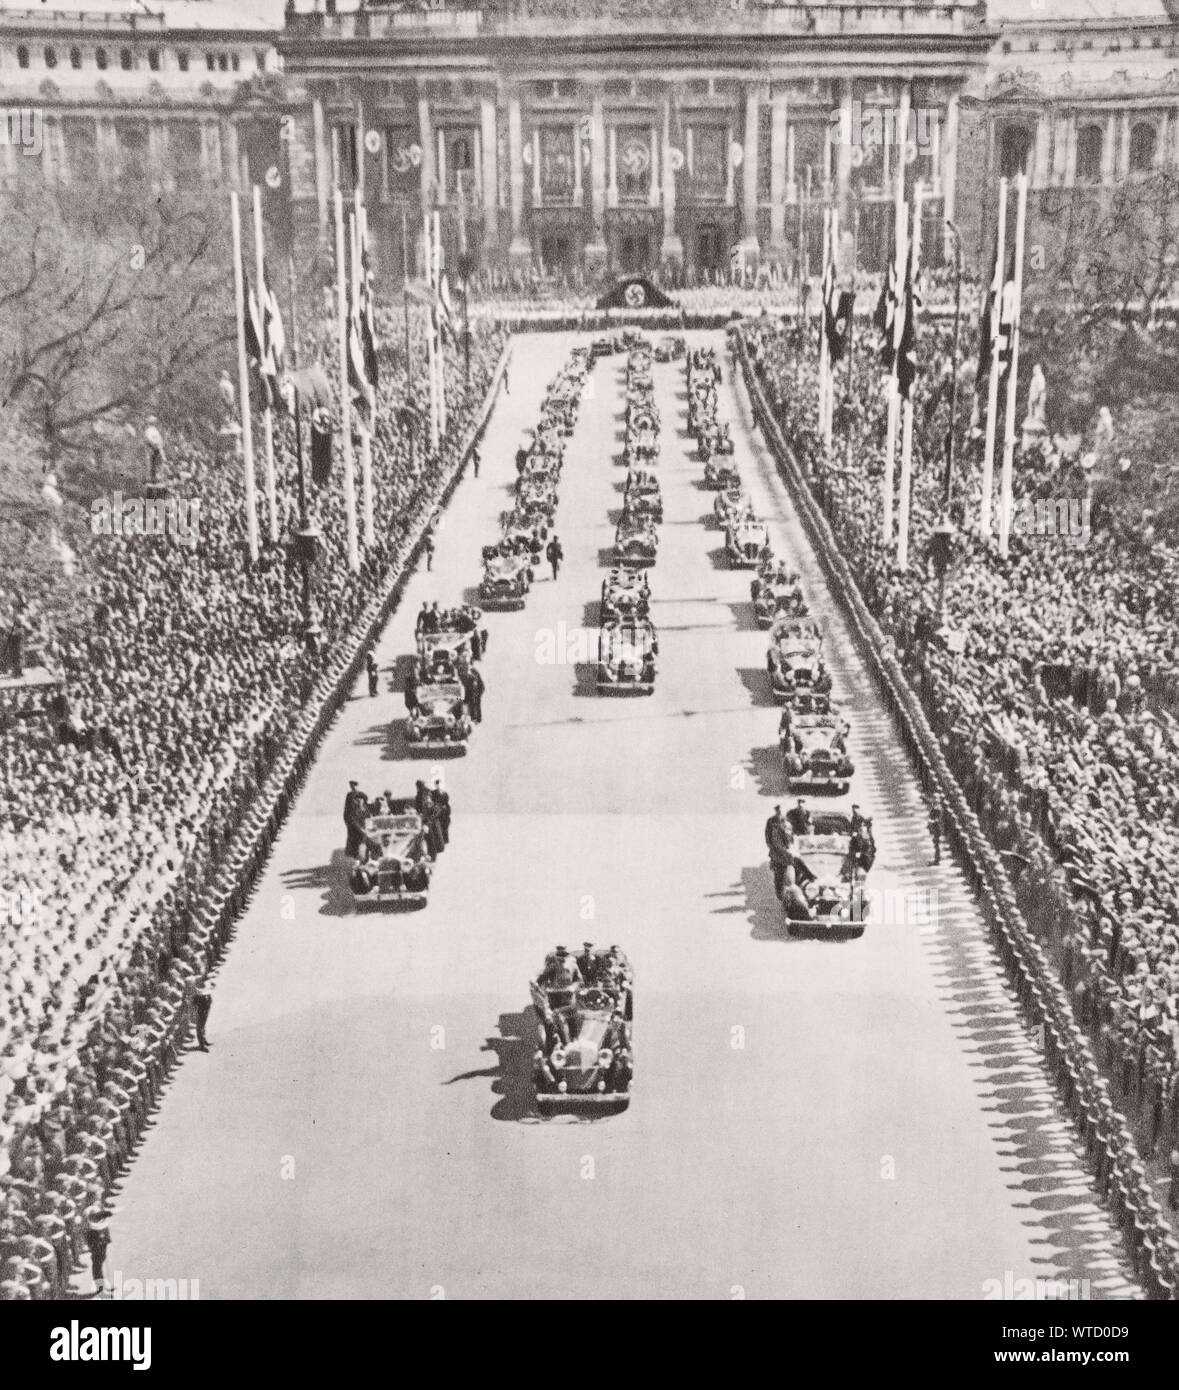 The anschluss succeeded: Hitler entered Vienna (April 1938). The Reich began its policy of annexations by controlling Austria. Stock Photo